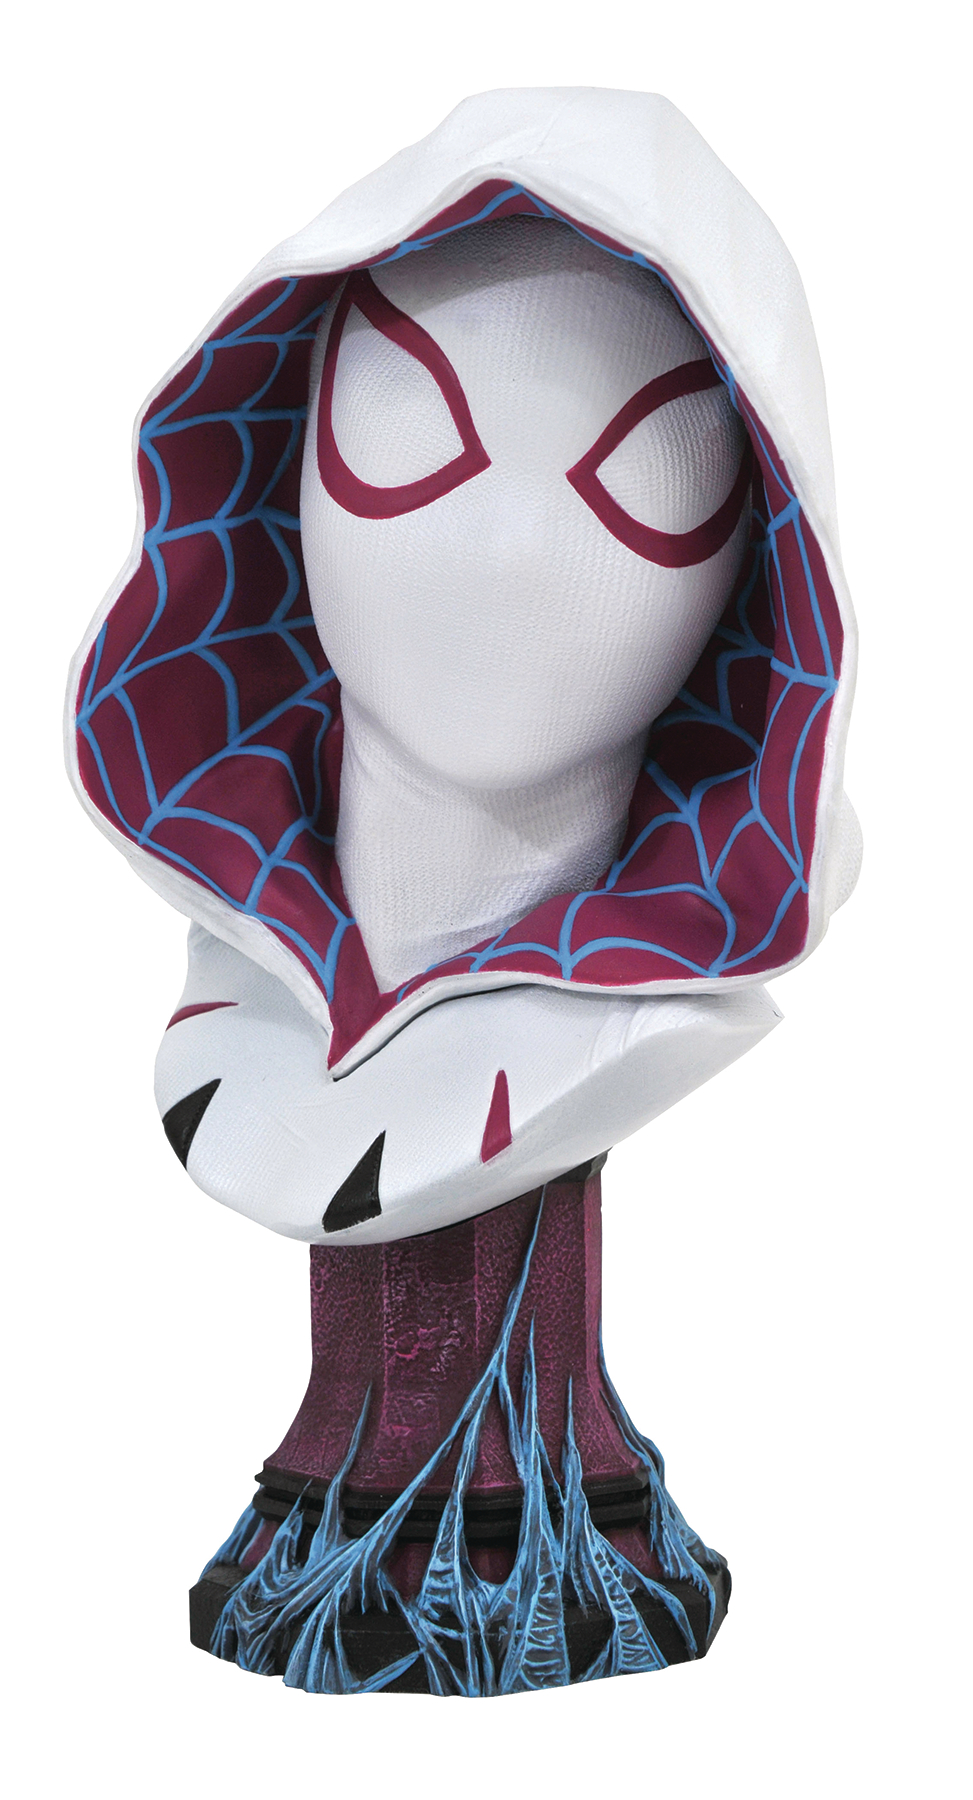 LEGENDS IN 3D MARVEL COMIC SPIDER-GWEN 1/2 SCALE BUST (O/A)